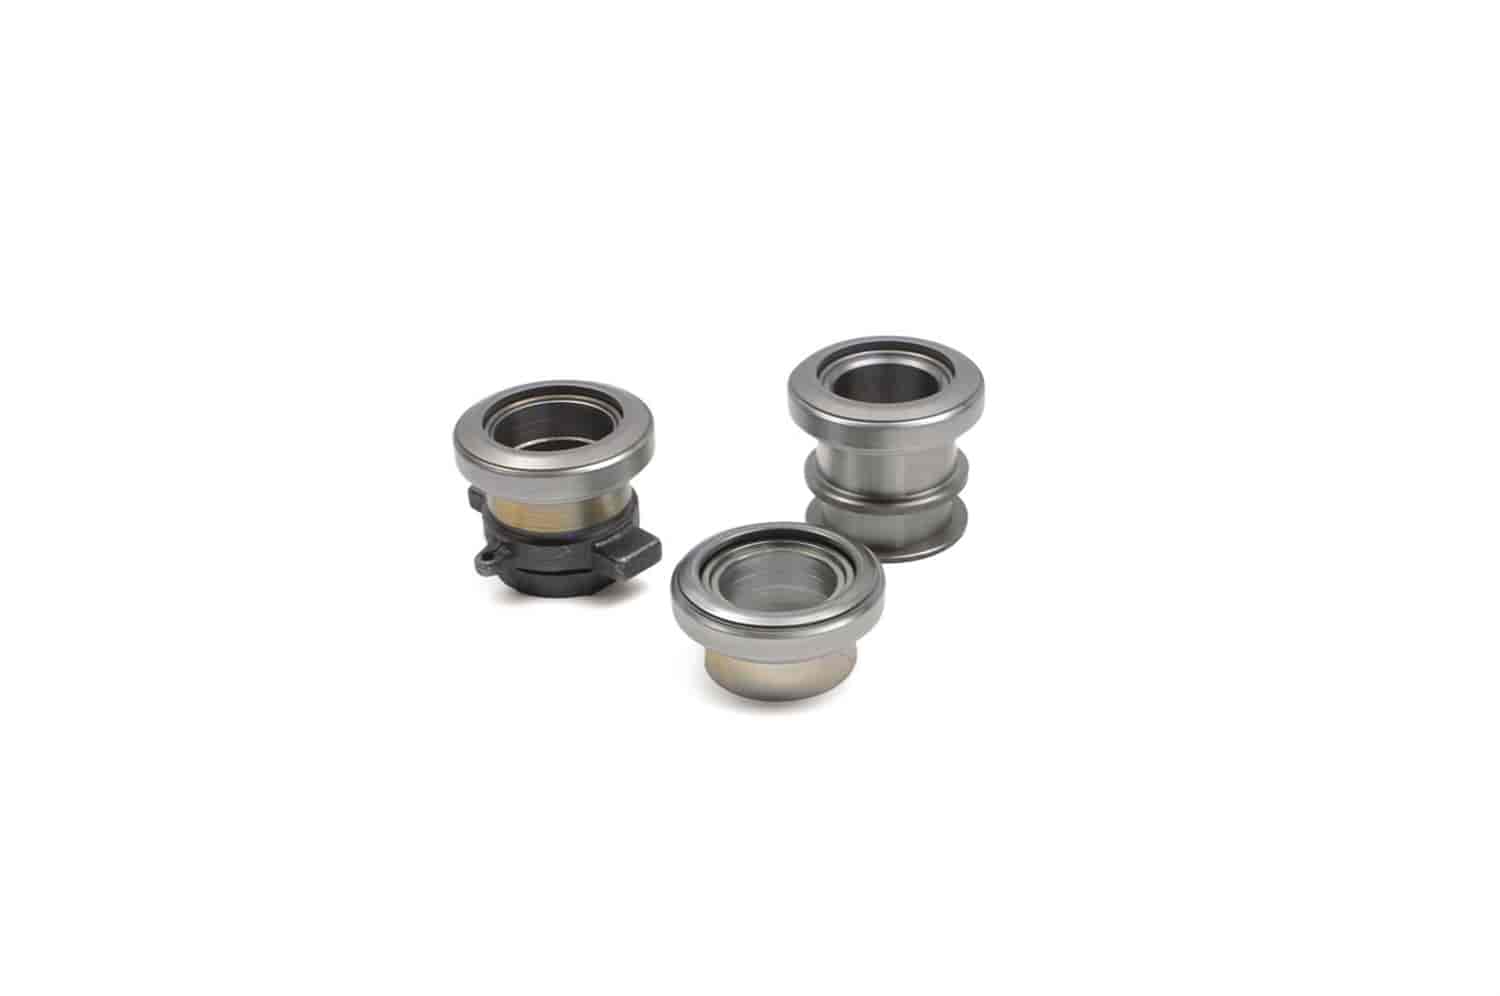 RELEASE BEARING FORD 7.25 3D